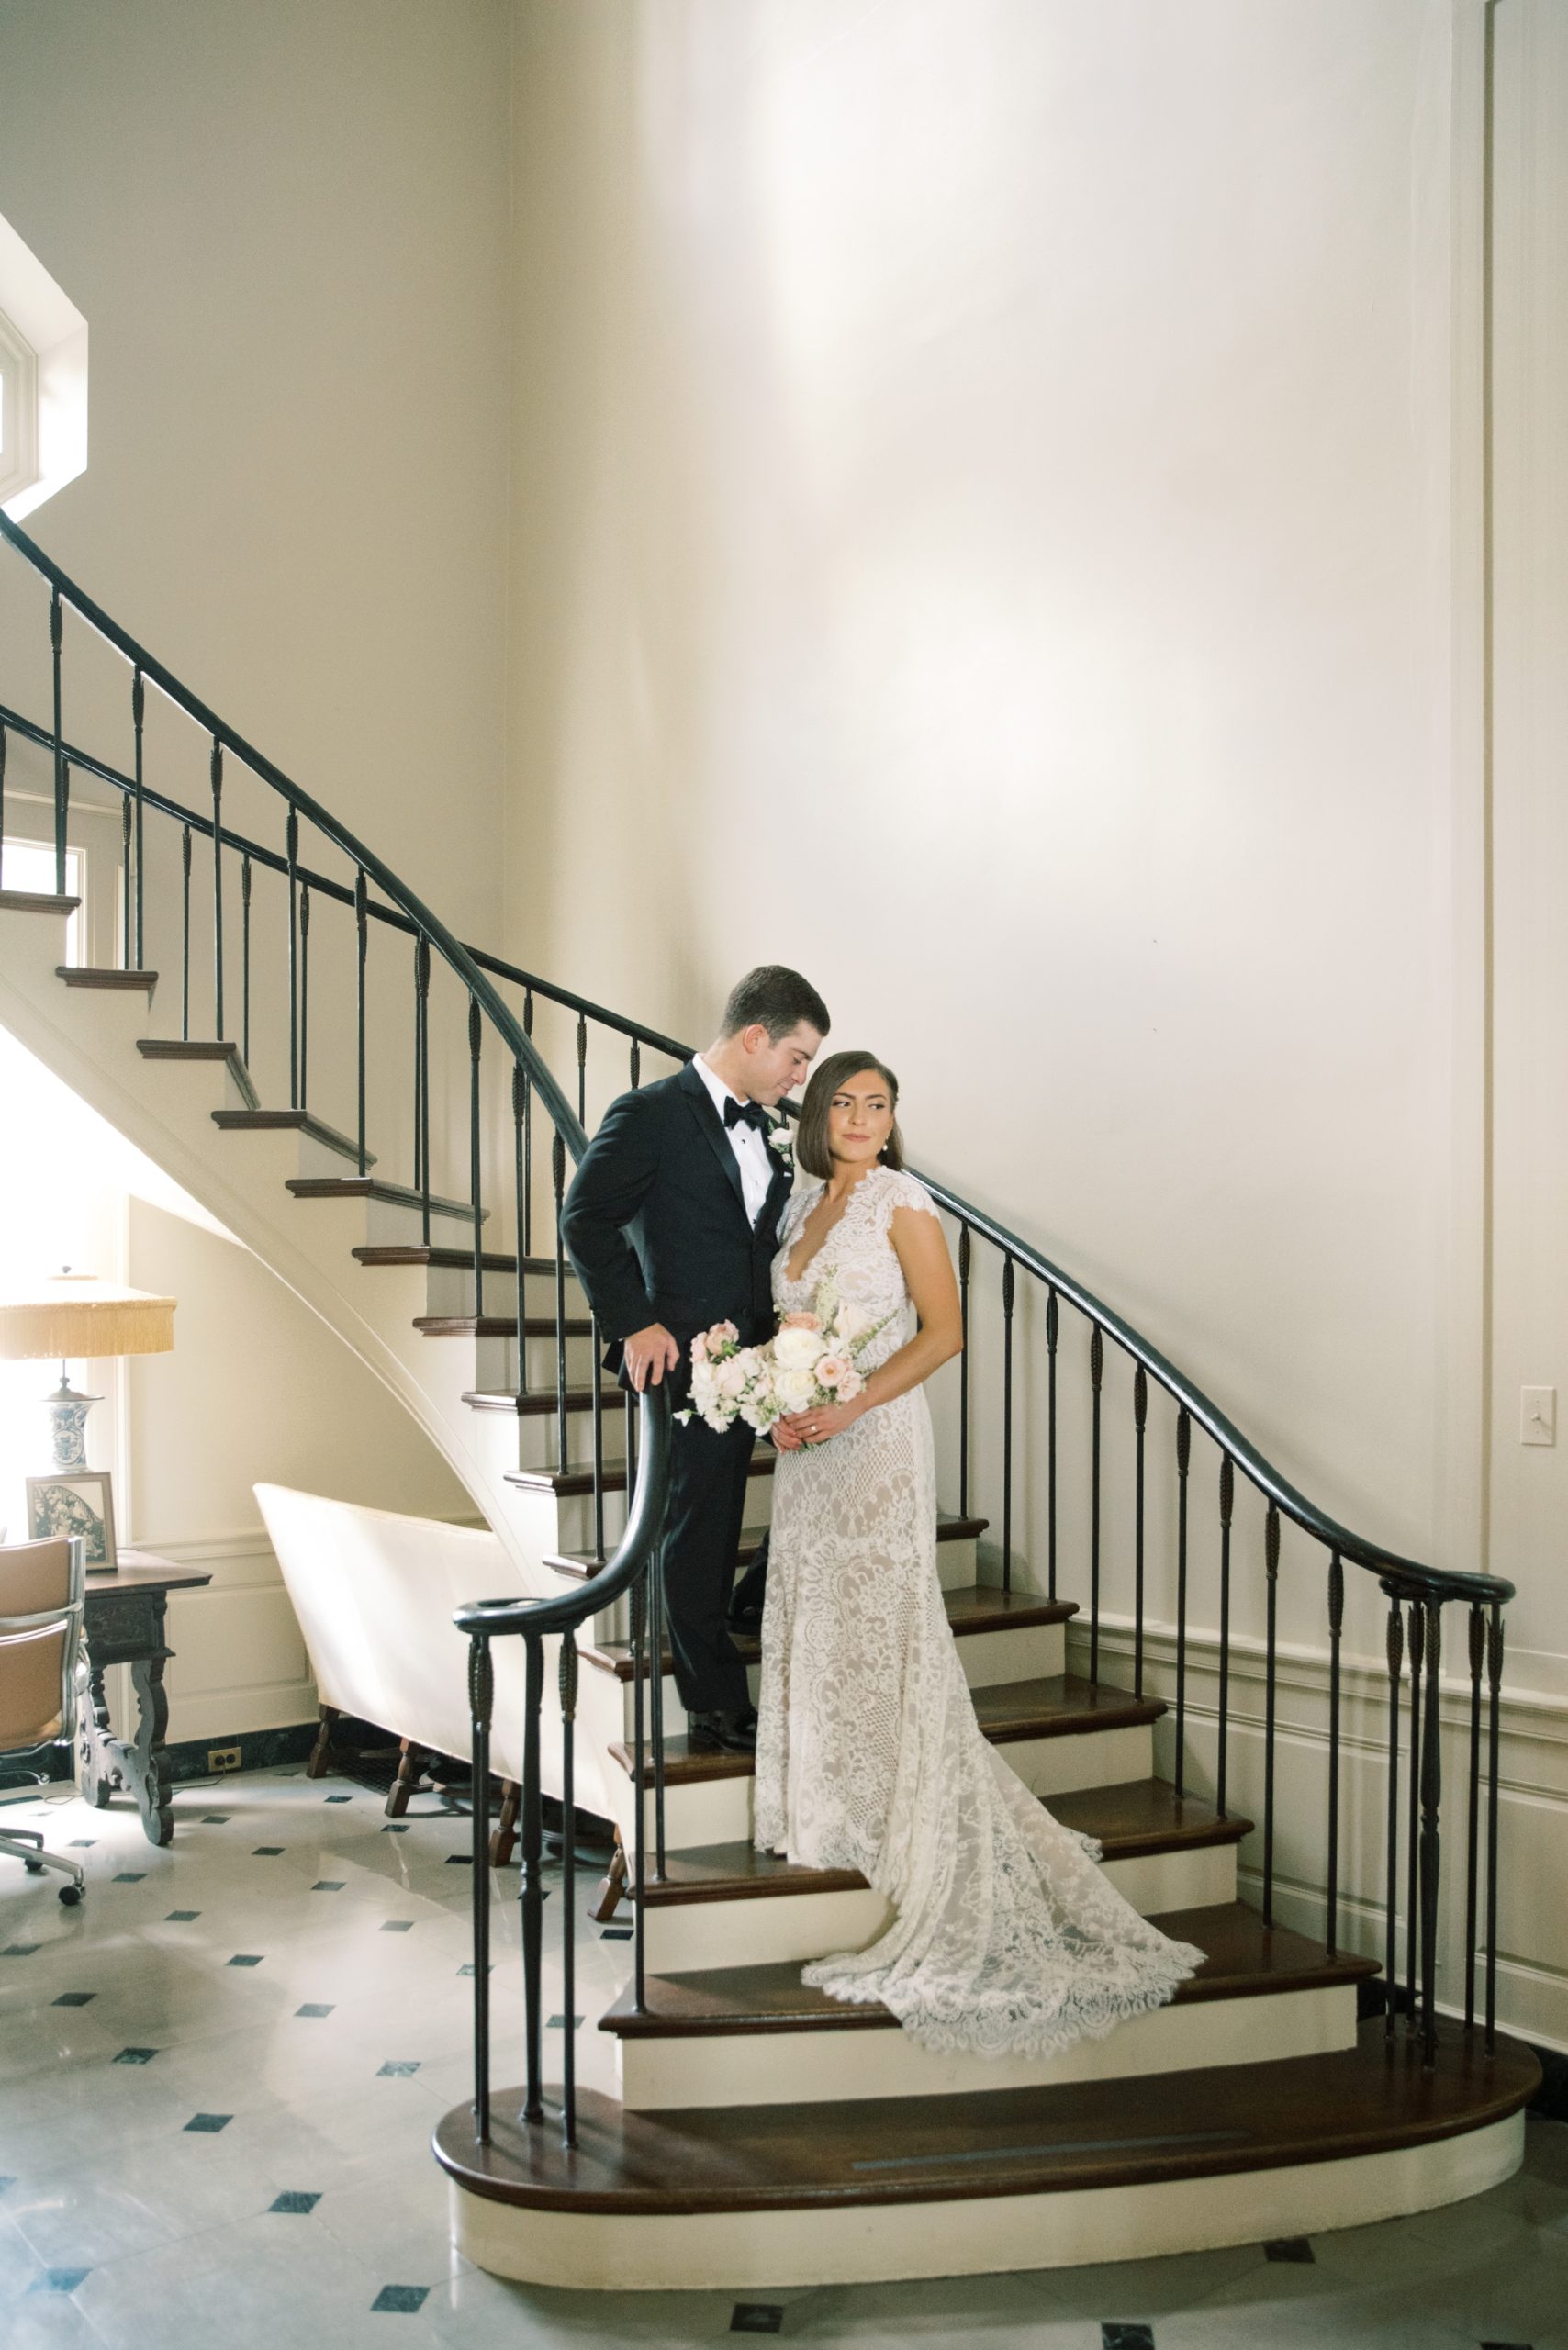 the couple posed on the grand staircase at Peterloon Estate